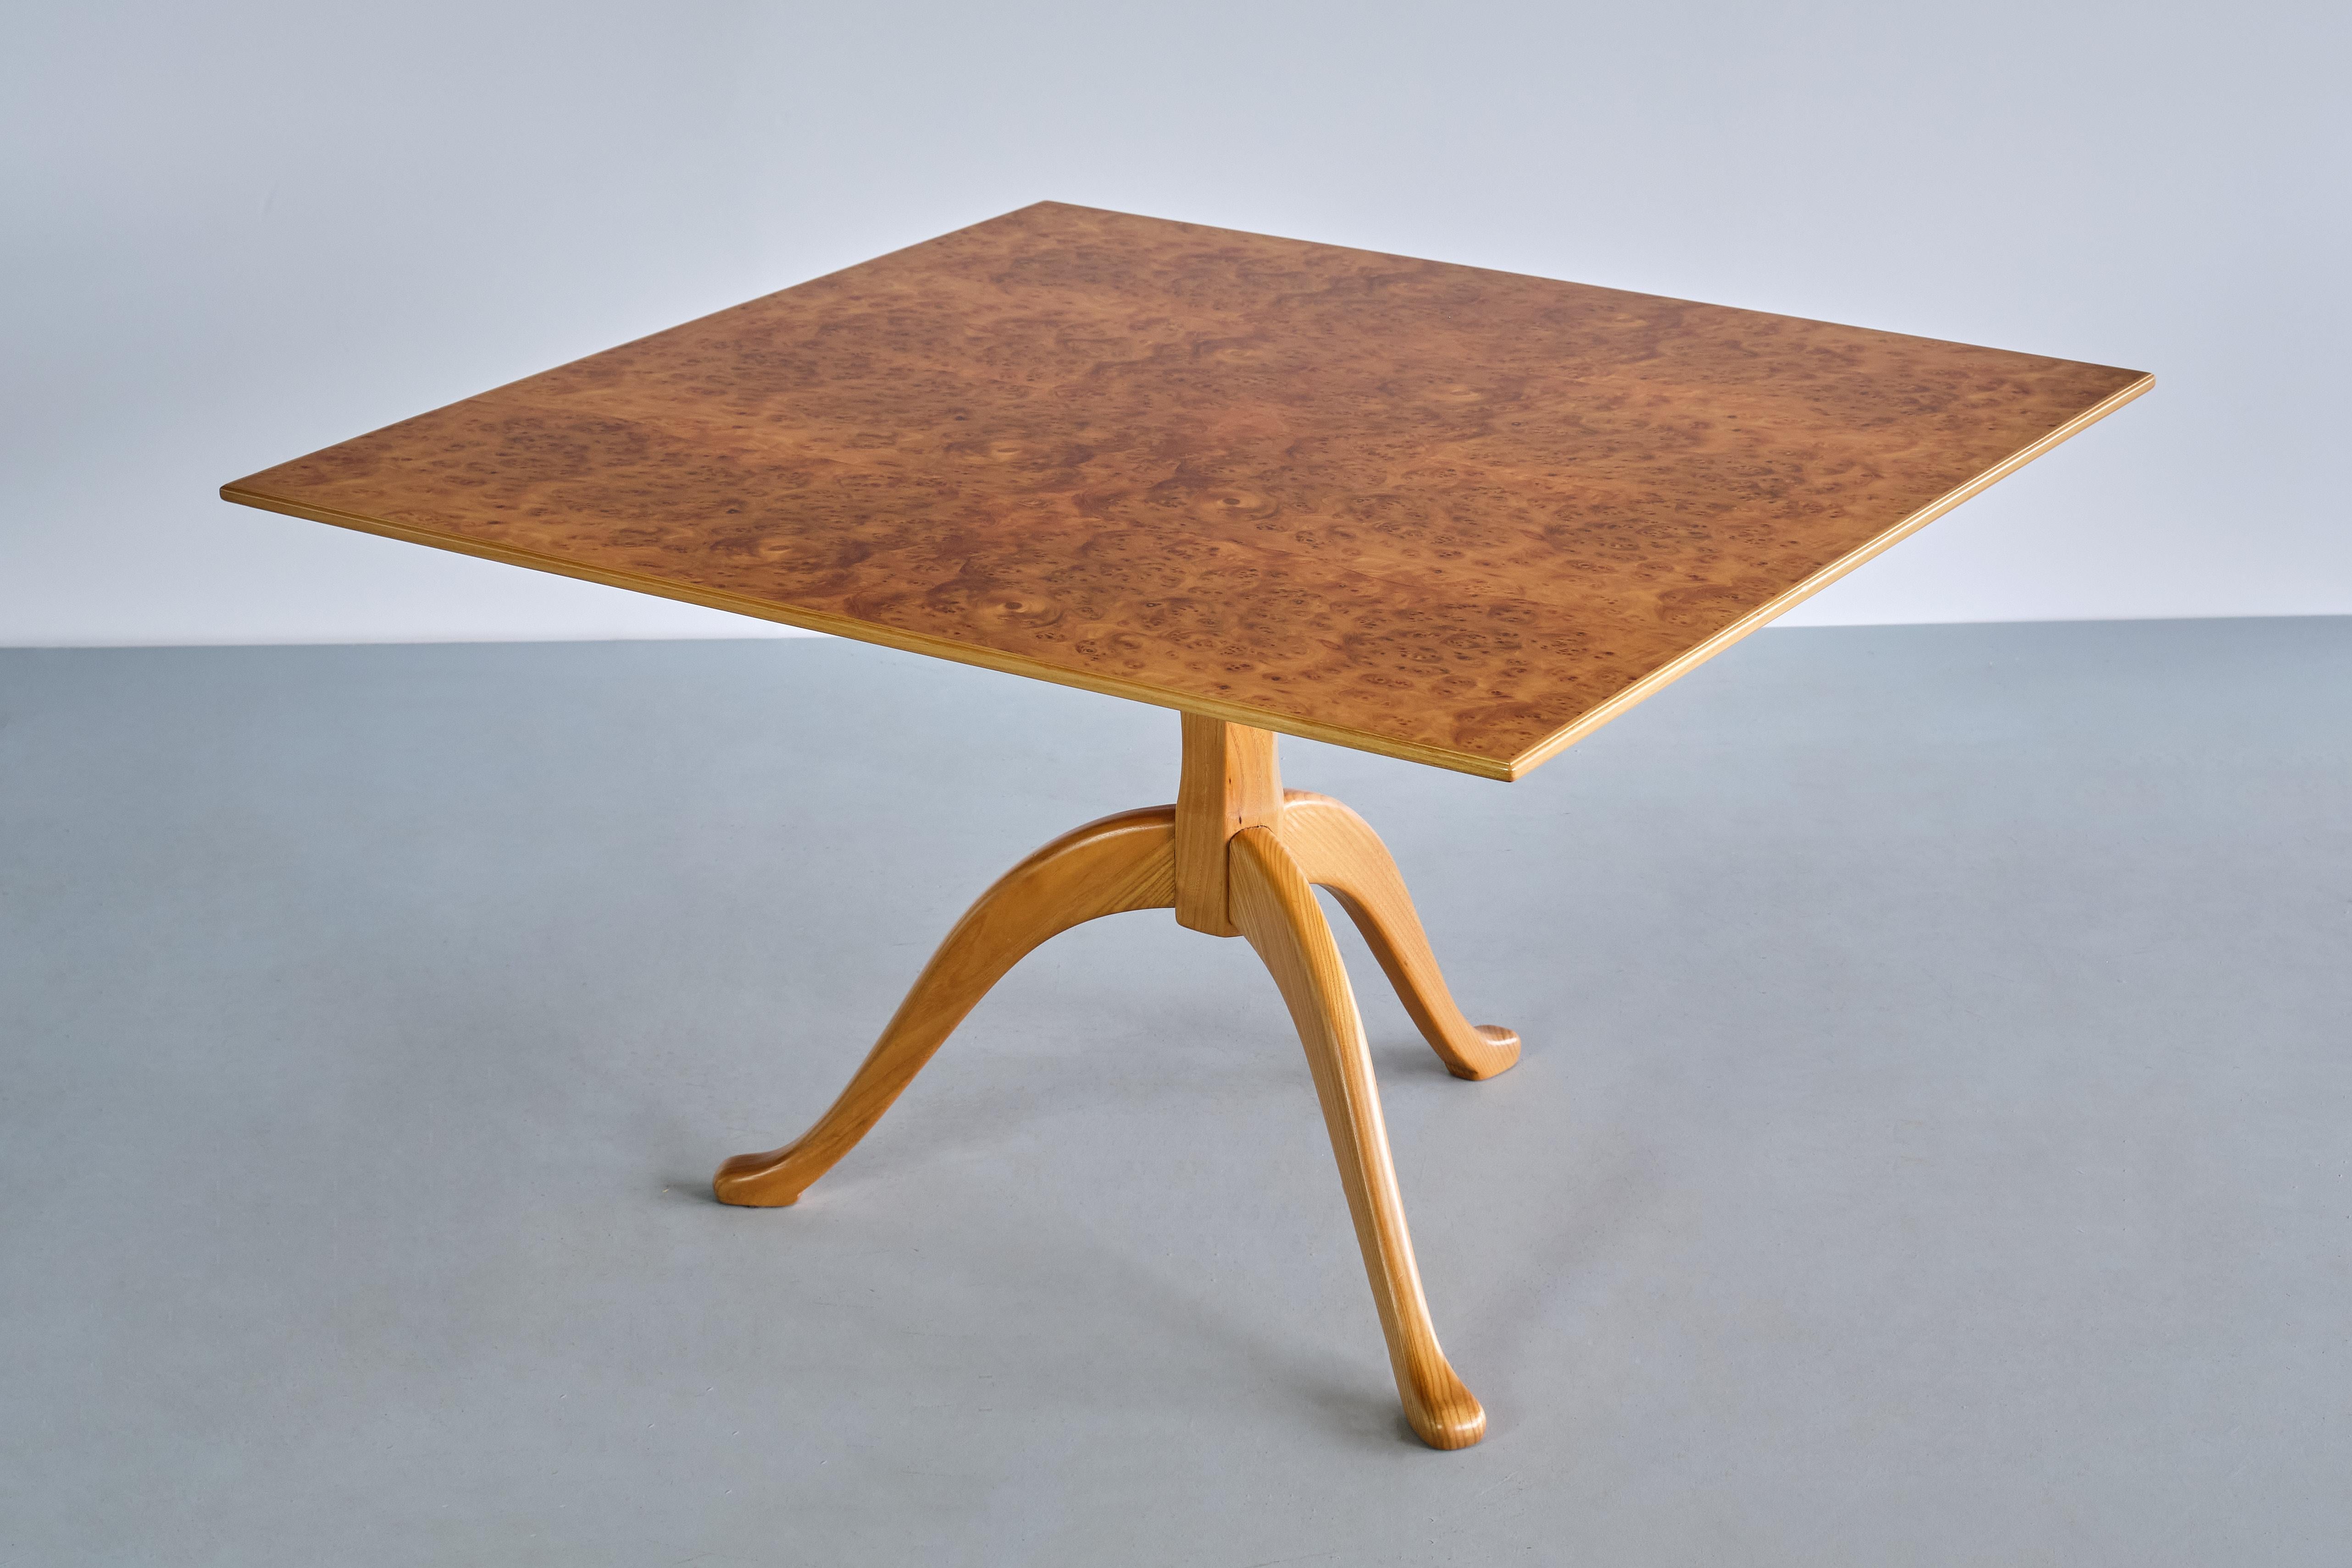 This elegant side table was designed by Carl Malmsten and produced by his company in Sweden in the 1960s. This is a rare variant of his iconic 'Berg' model, with a larger square top instead of the usual round, smaller tops.
The table can be used as